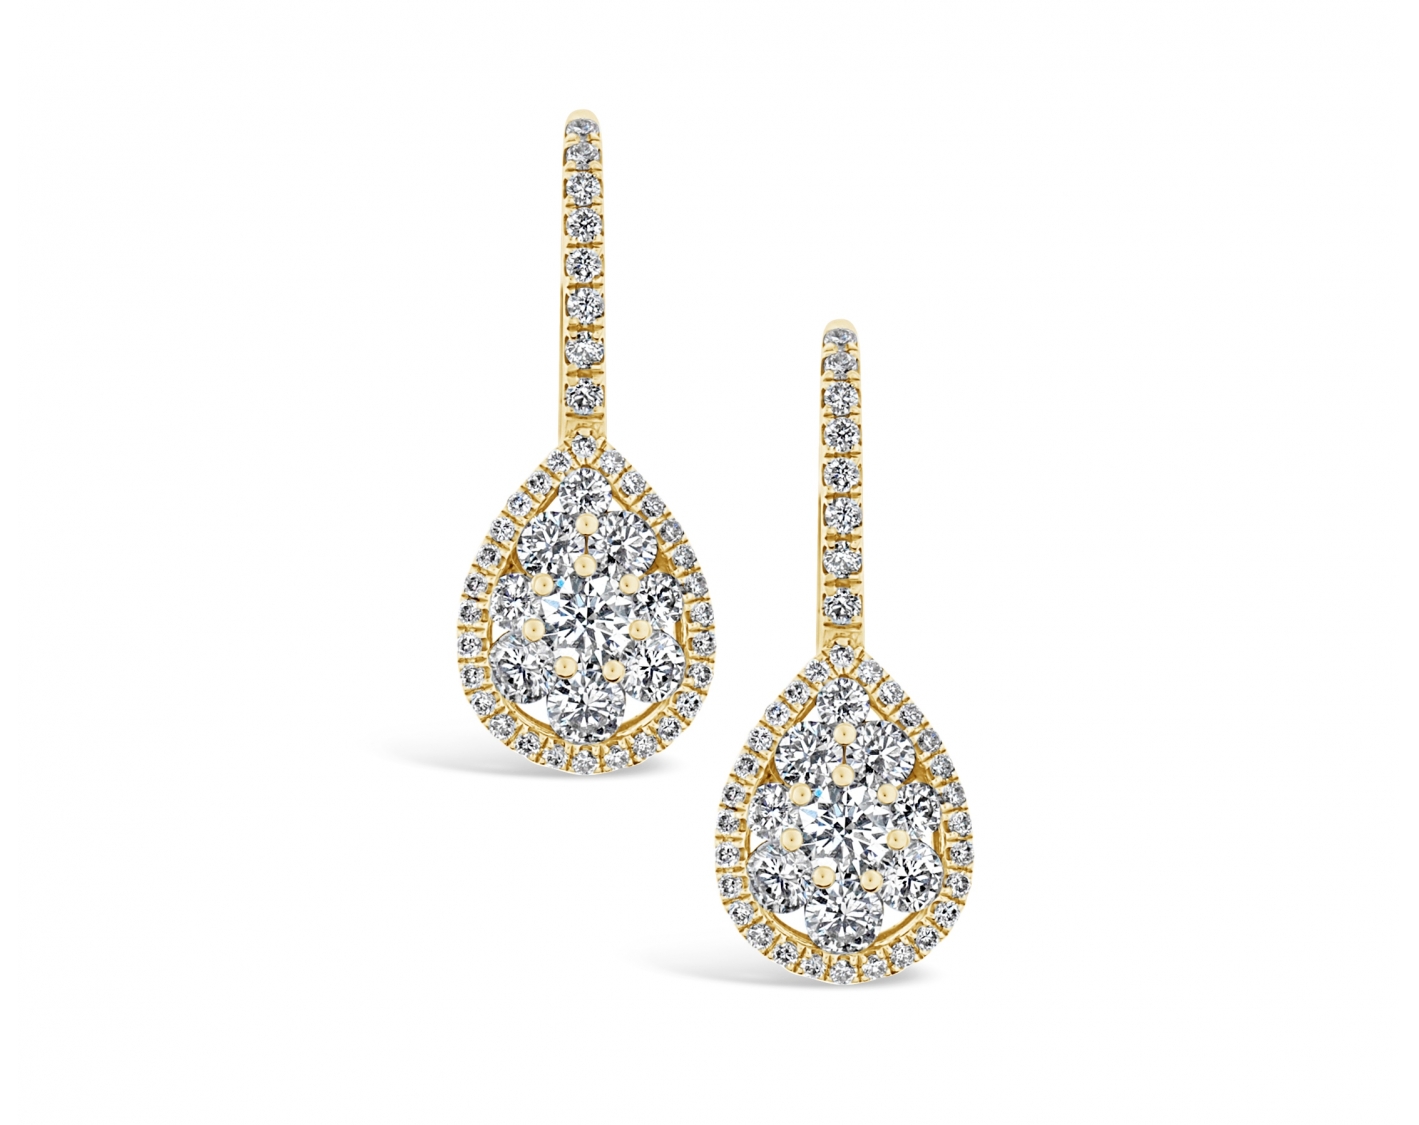 18k yellow gold pear shaped illusion set diamond earrings with round upstones